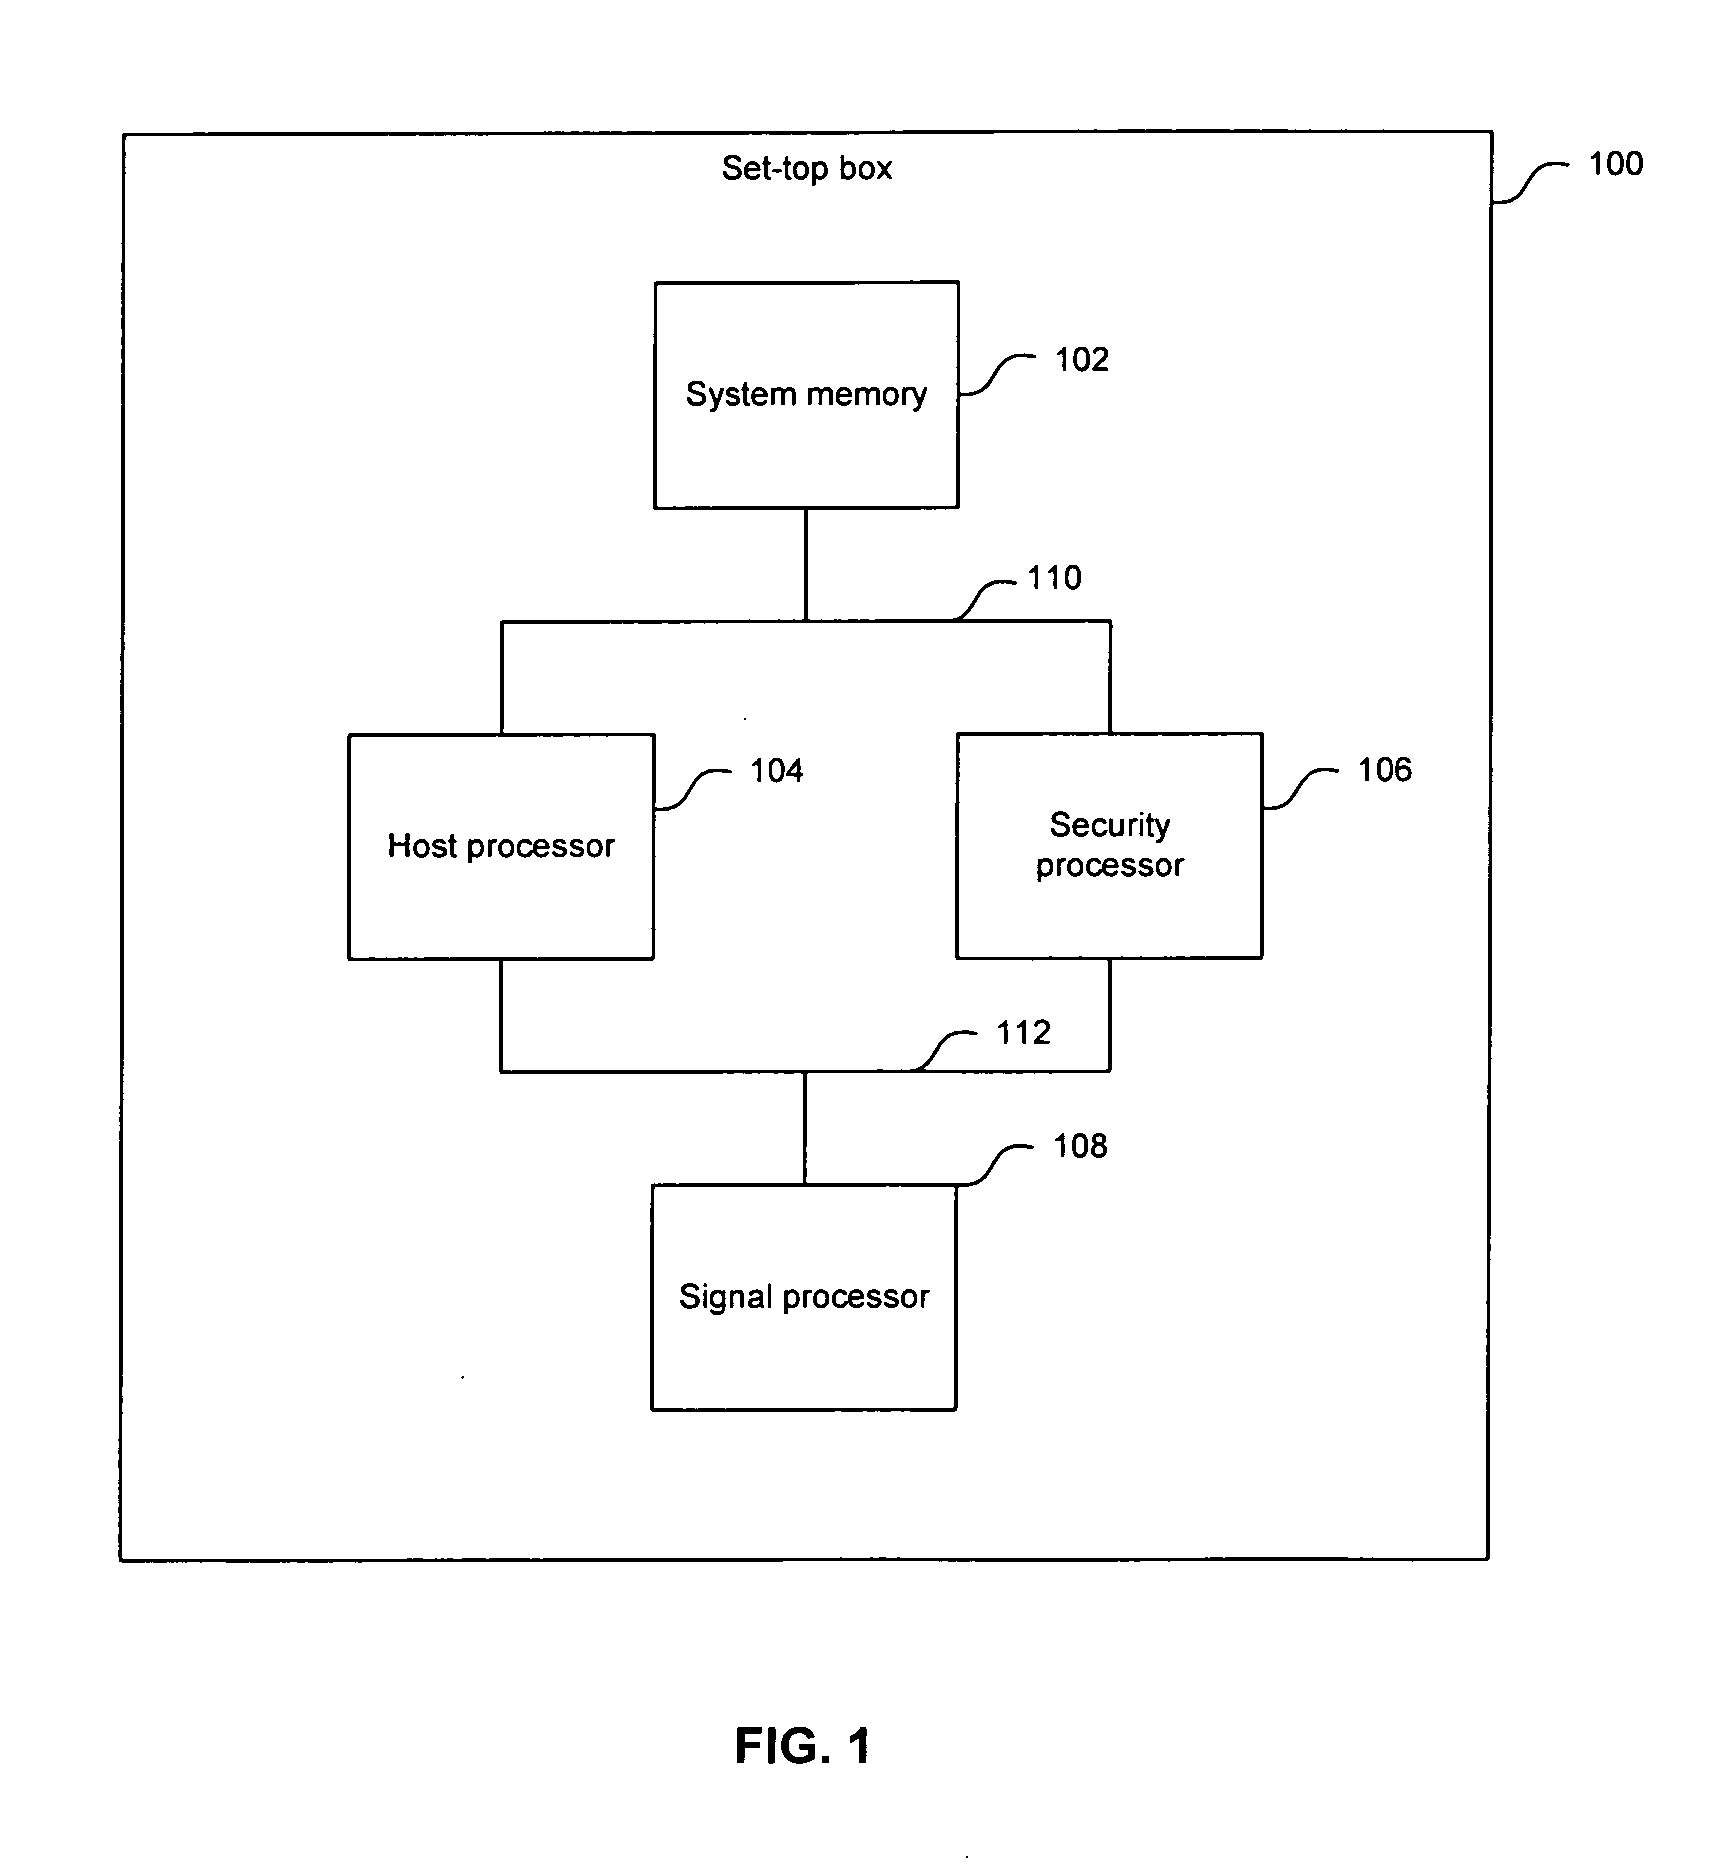 Method and apparatus for constructing an access control matrix for a set-top box security processor